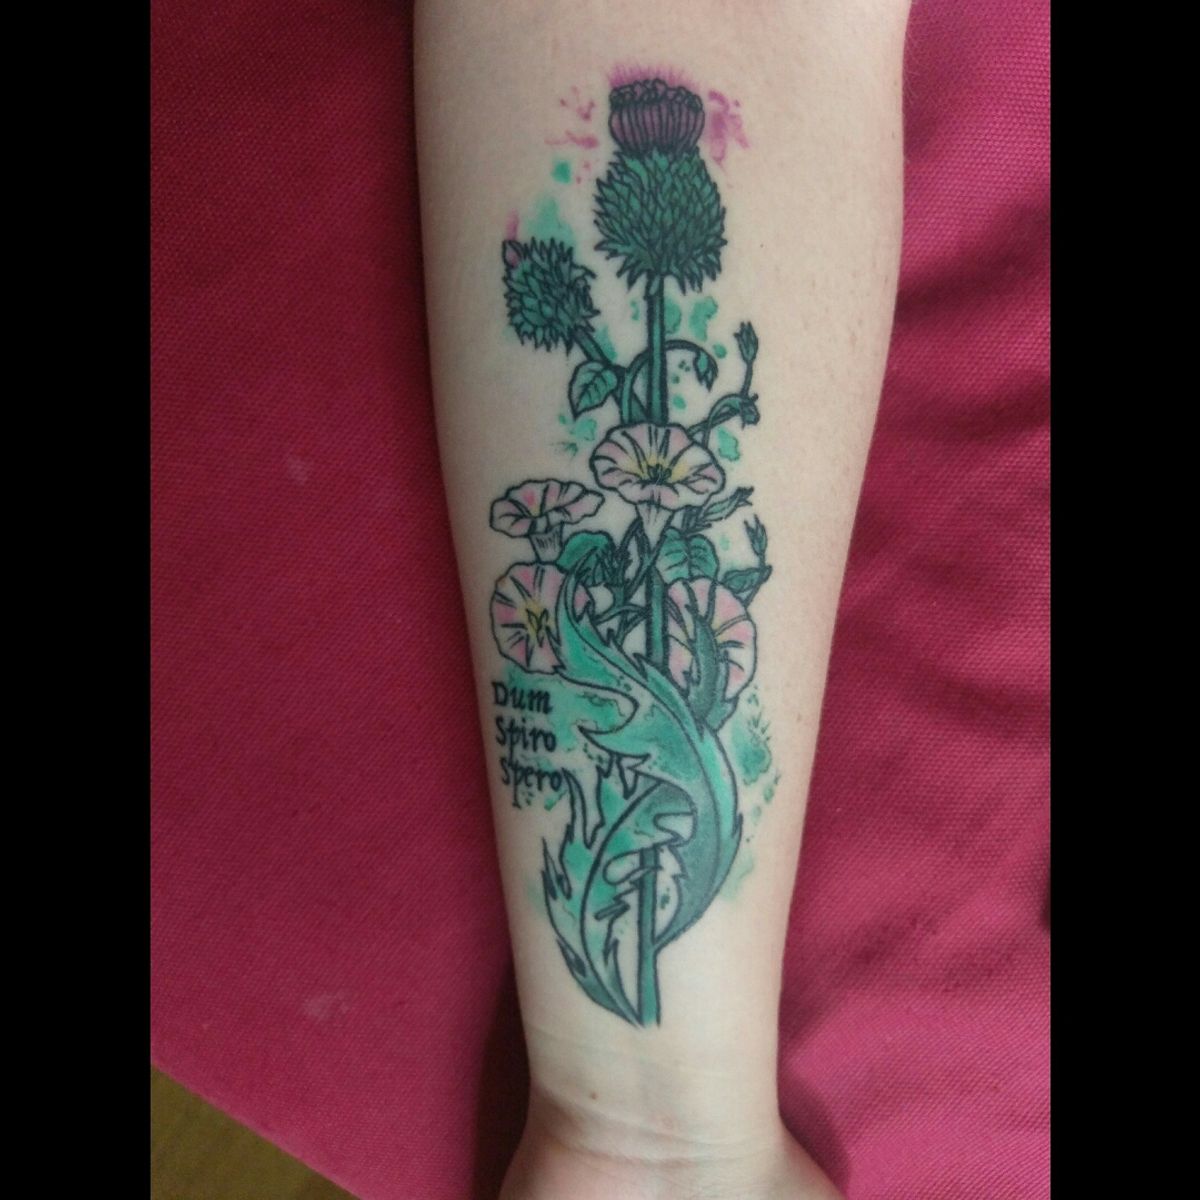 Tattoo uploaded by Lara • Thistle and bindweed with a touch of watercolour.  Memorial for my dad. Dum Spiro Spero - while I breathe I hope maclennan  clan motto. Done by Sylus